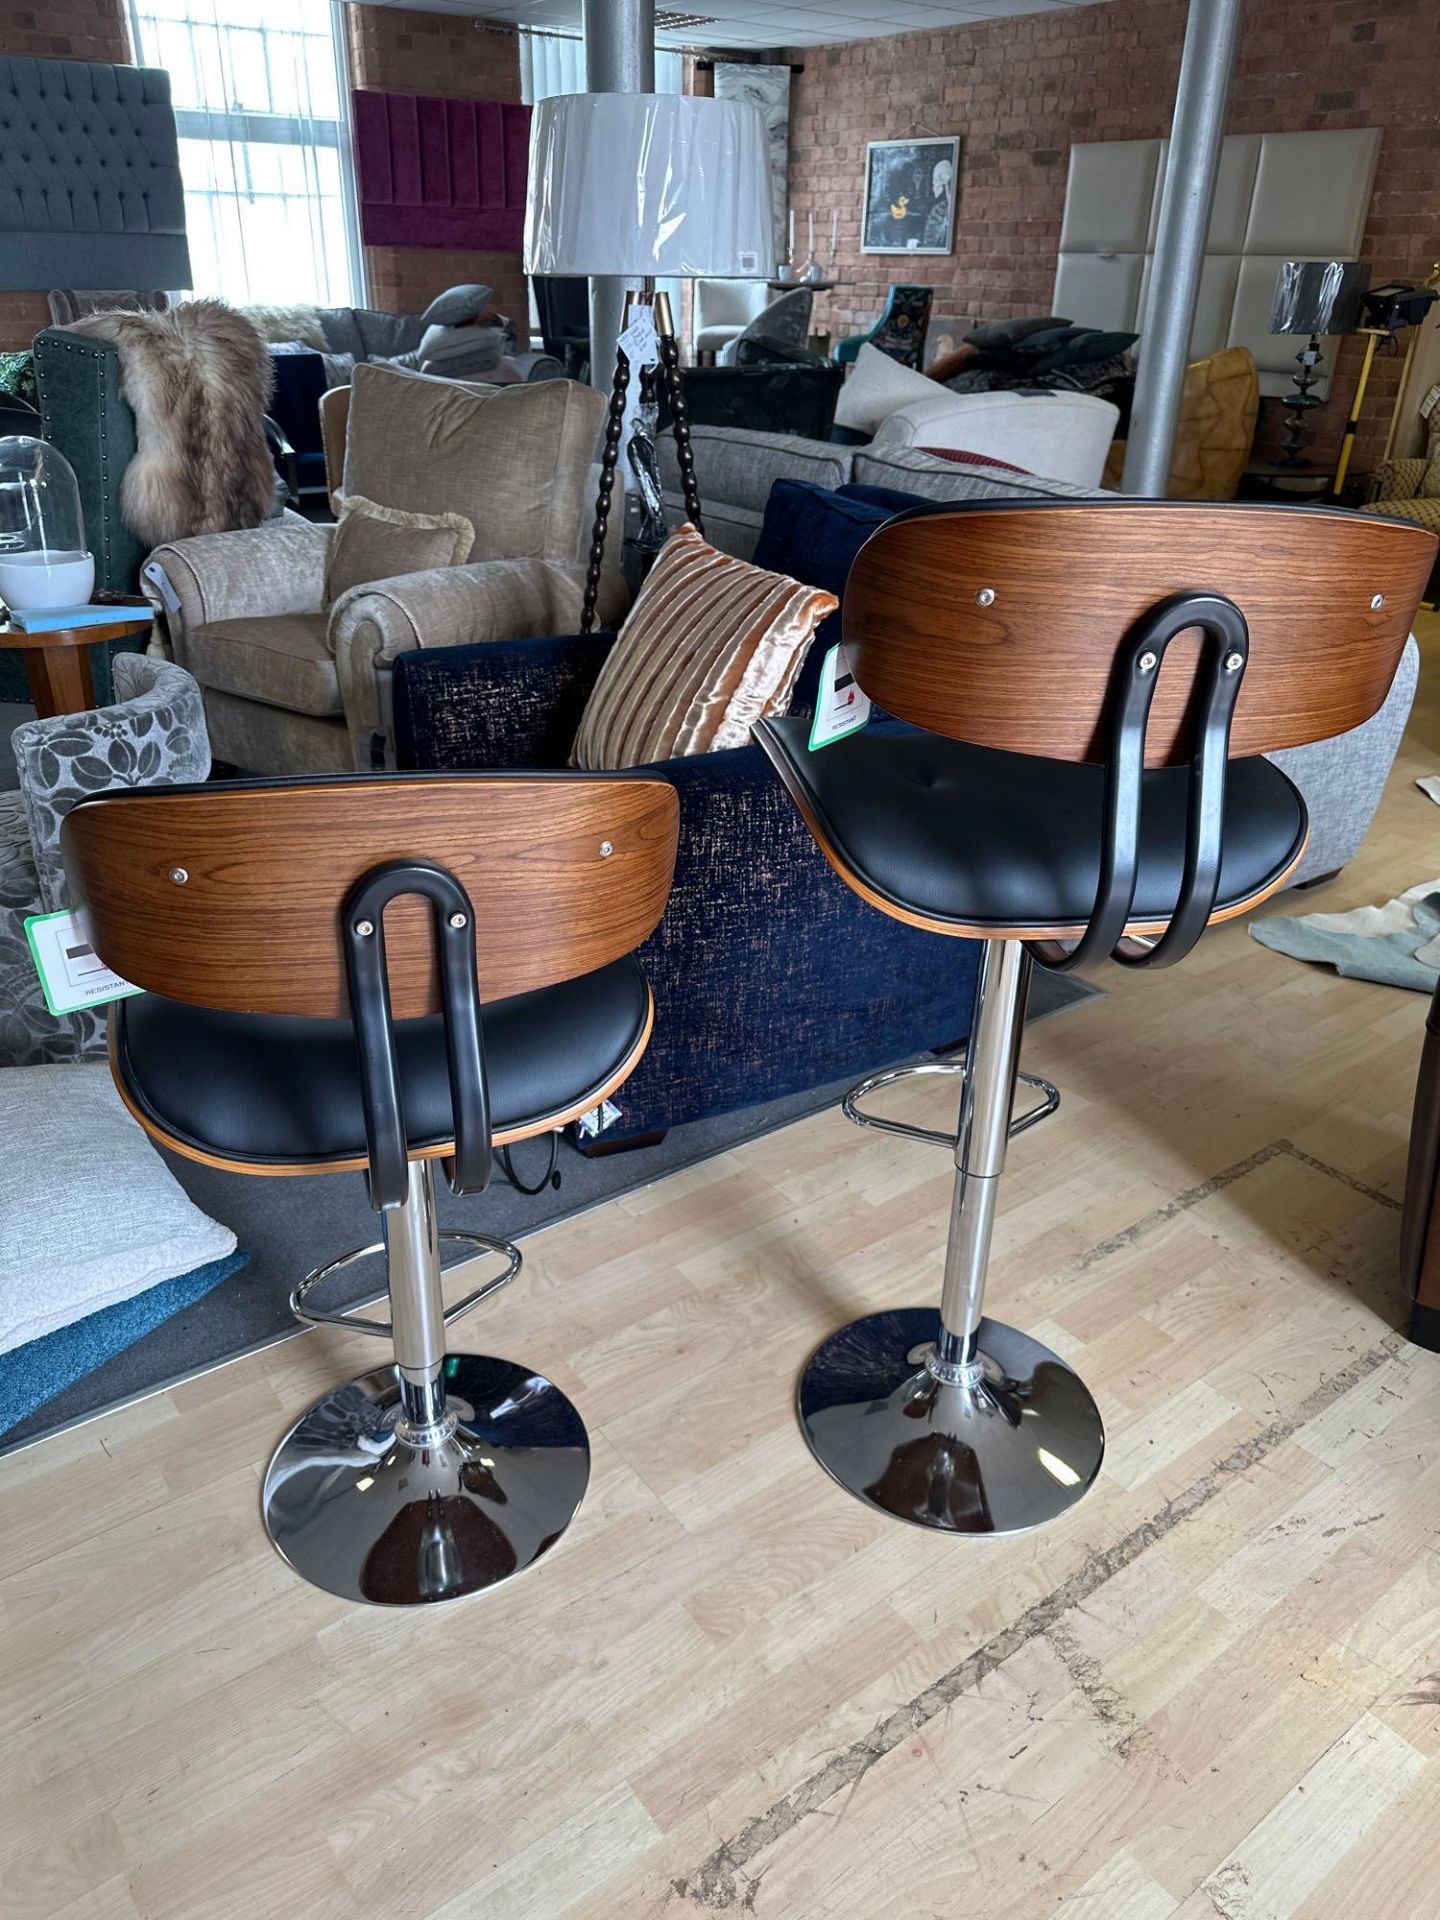 A Pair Of Wooden Gas Lift Bar Stool Black PU Leather Bar Stool With Chrome Base Featuring A Wooden - Image 4 of 5